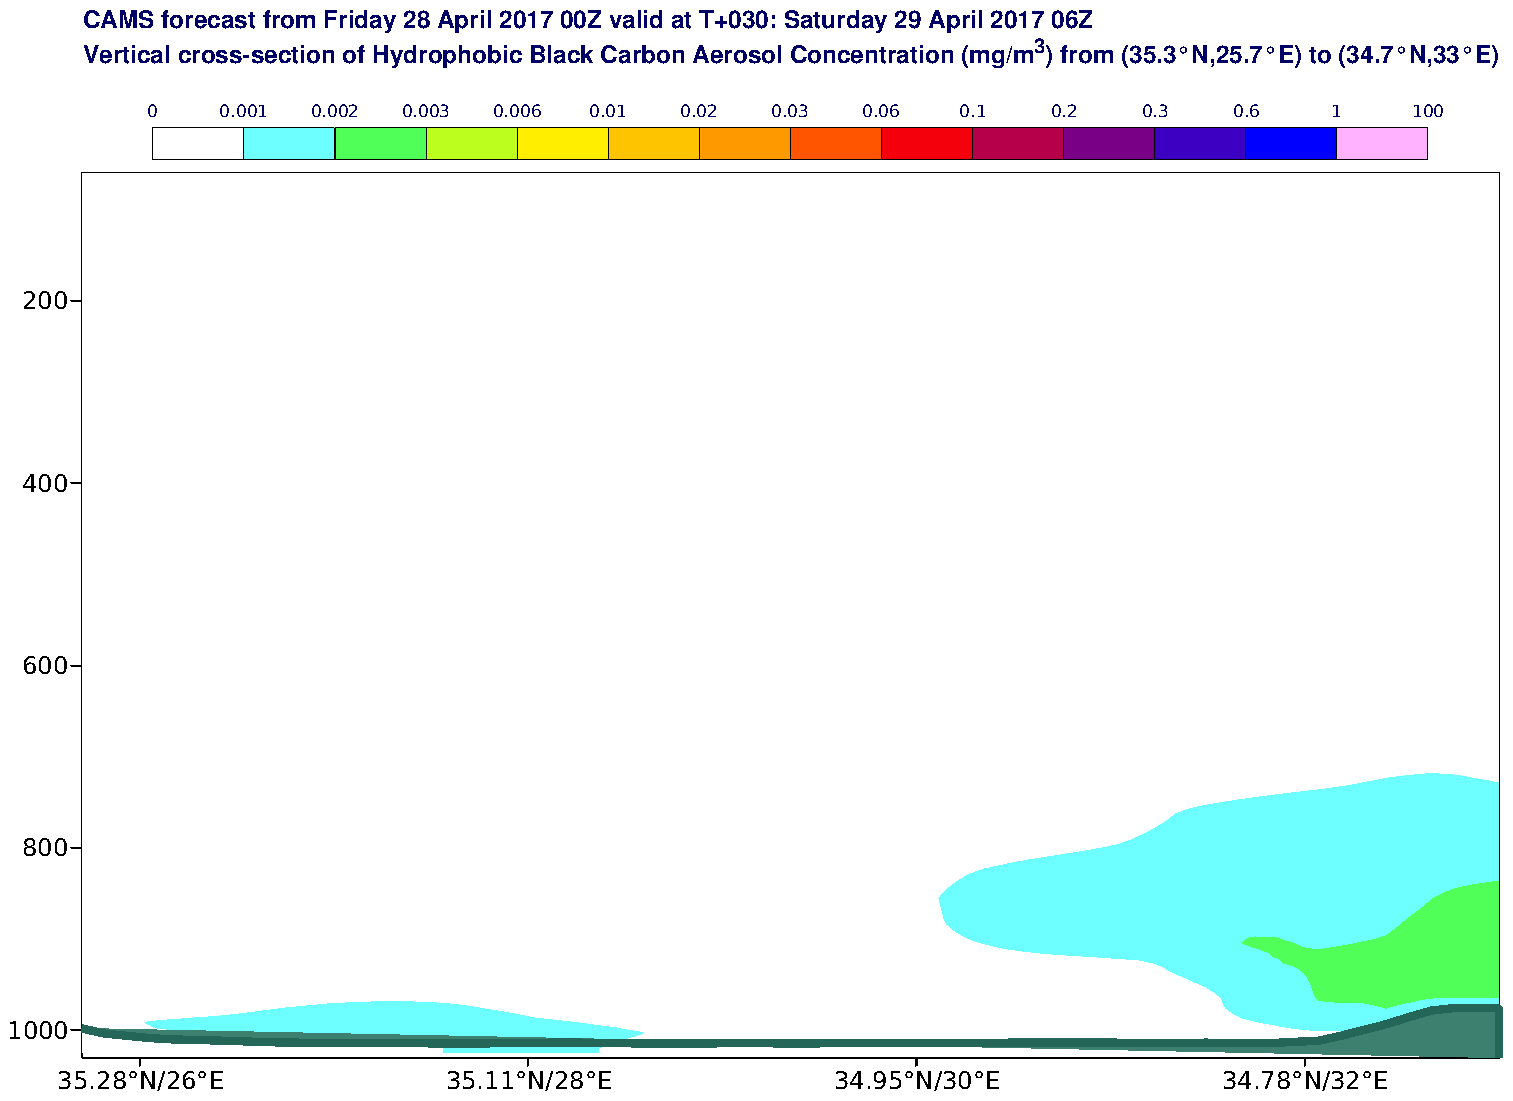 Vertical cross-section of Hydrophobic Black Carbon Aerosol Concentration (mg/m3) valid at T30 - 2017-04-29 06:00